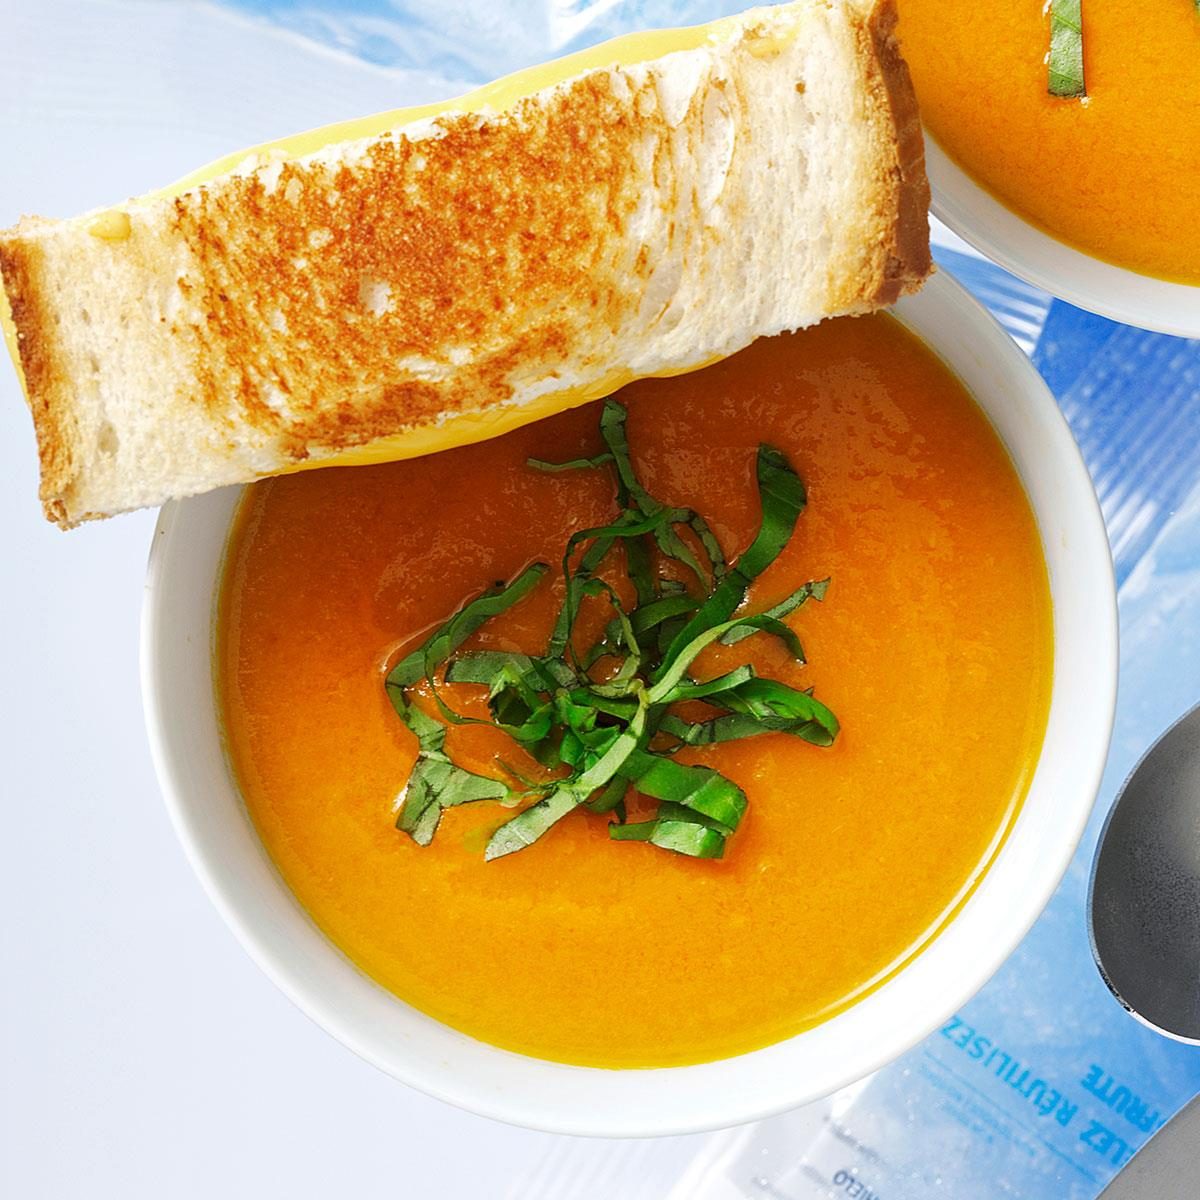 Inspired by: California Pizza Kitchen’s Tomato Basil Bisque